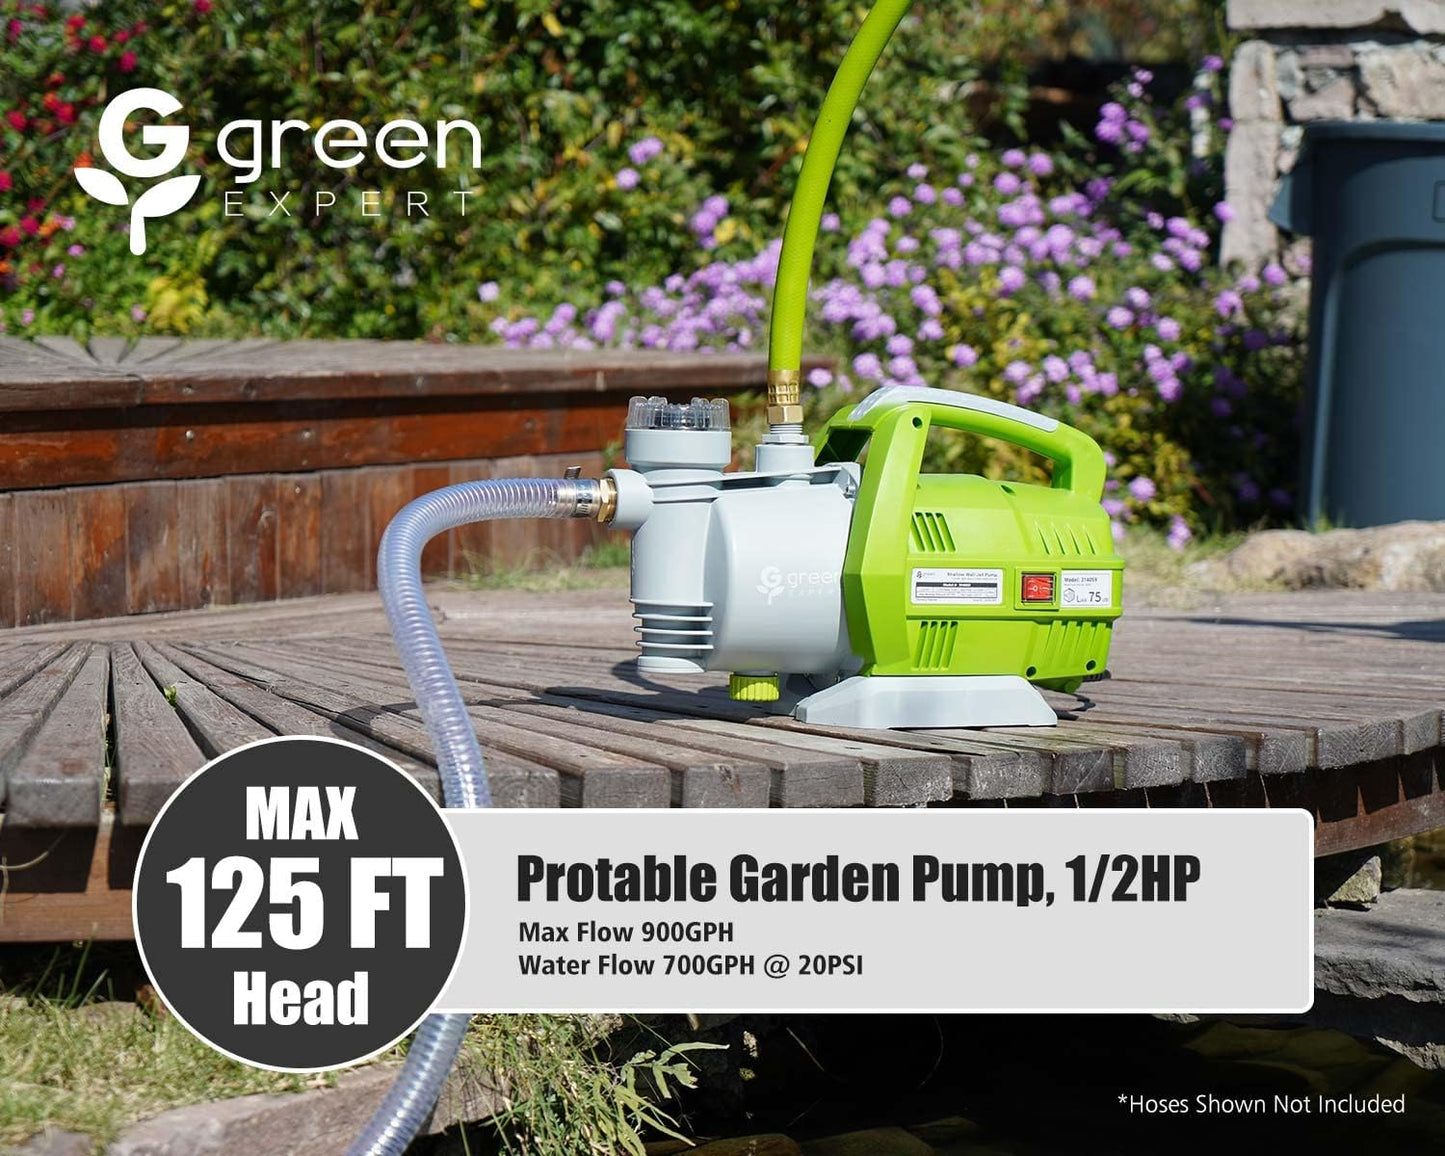 Green Expert 1/2HP Garden Jet Pump with Prefilter for Water Clean Transport Max Head 125FT Flow 900GPH Portable Shallow Well Pump for Home Lawn Sprinkler Backyard Farm Irrigation 314059